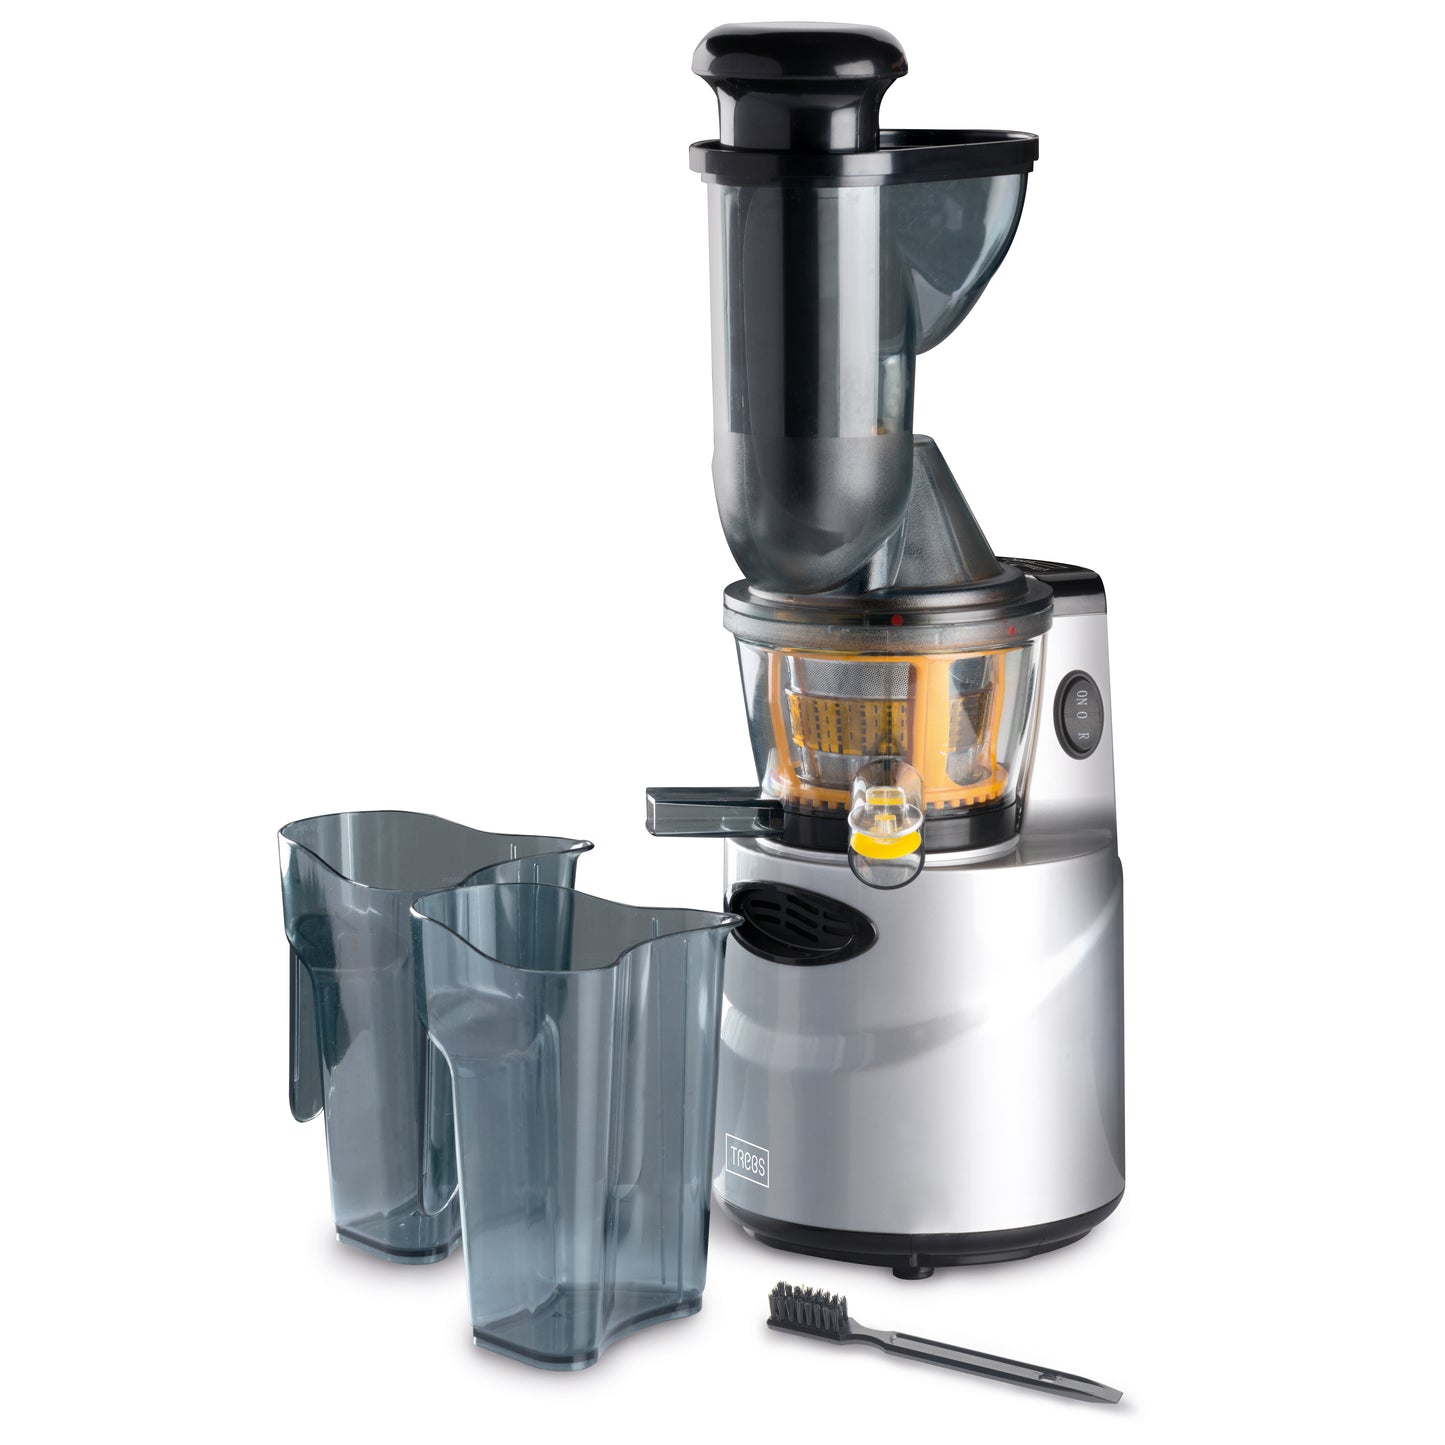 Trebs 99321 - Slowjuicer / Comfortjuicer with an extra-large feeding tube